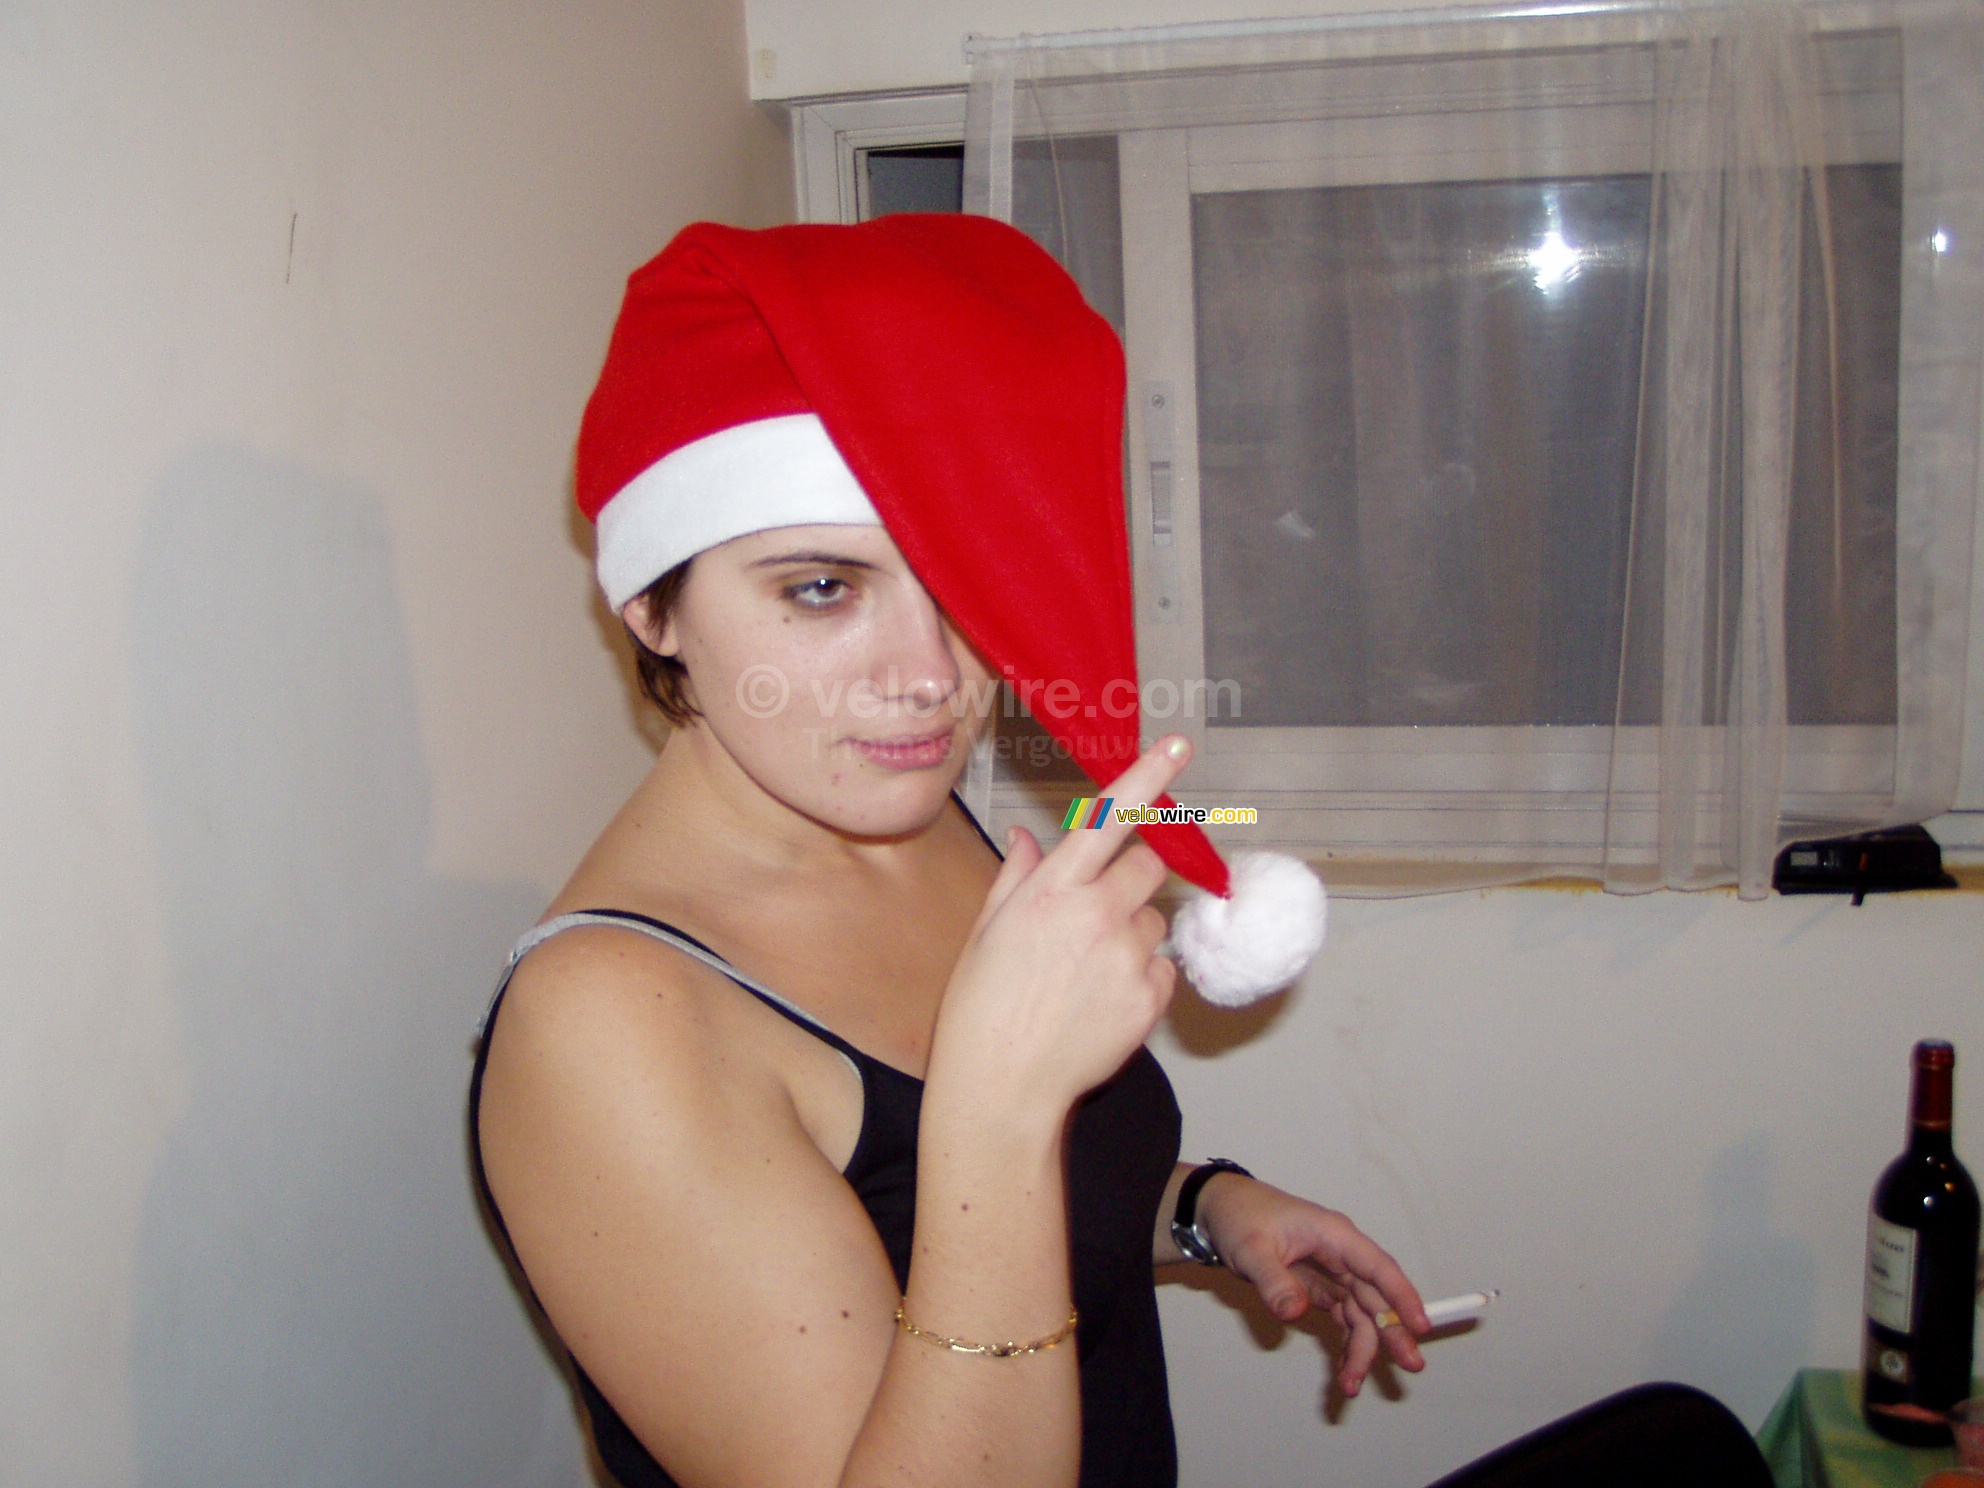 Virginie with a Christmas hat